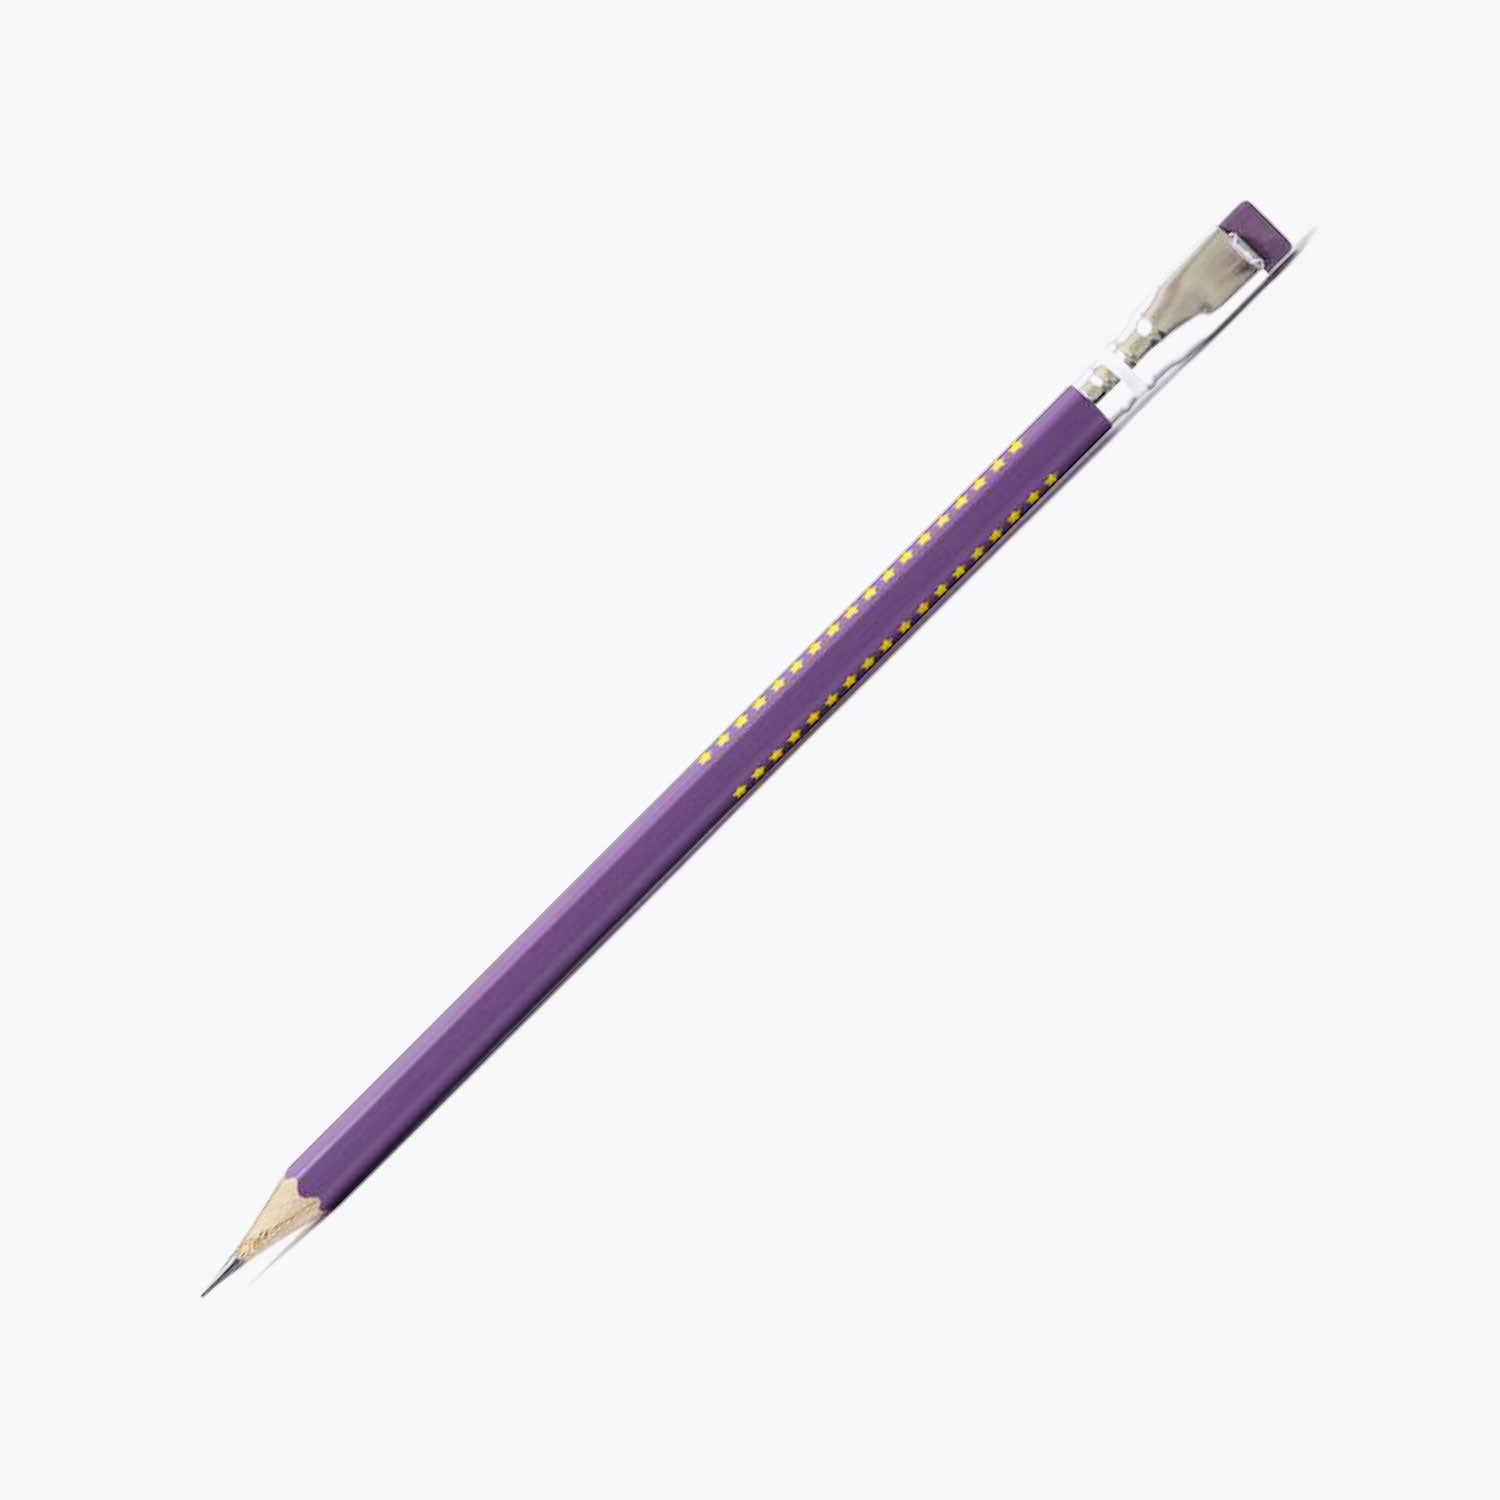 Palomino Blackwing - Pencil - Volume XIX - Box of 12 (Limited Edition)